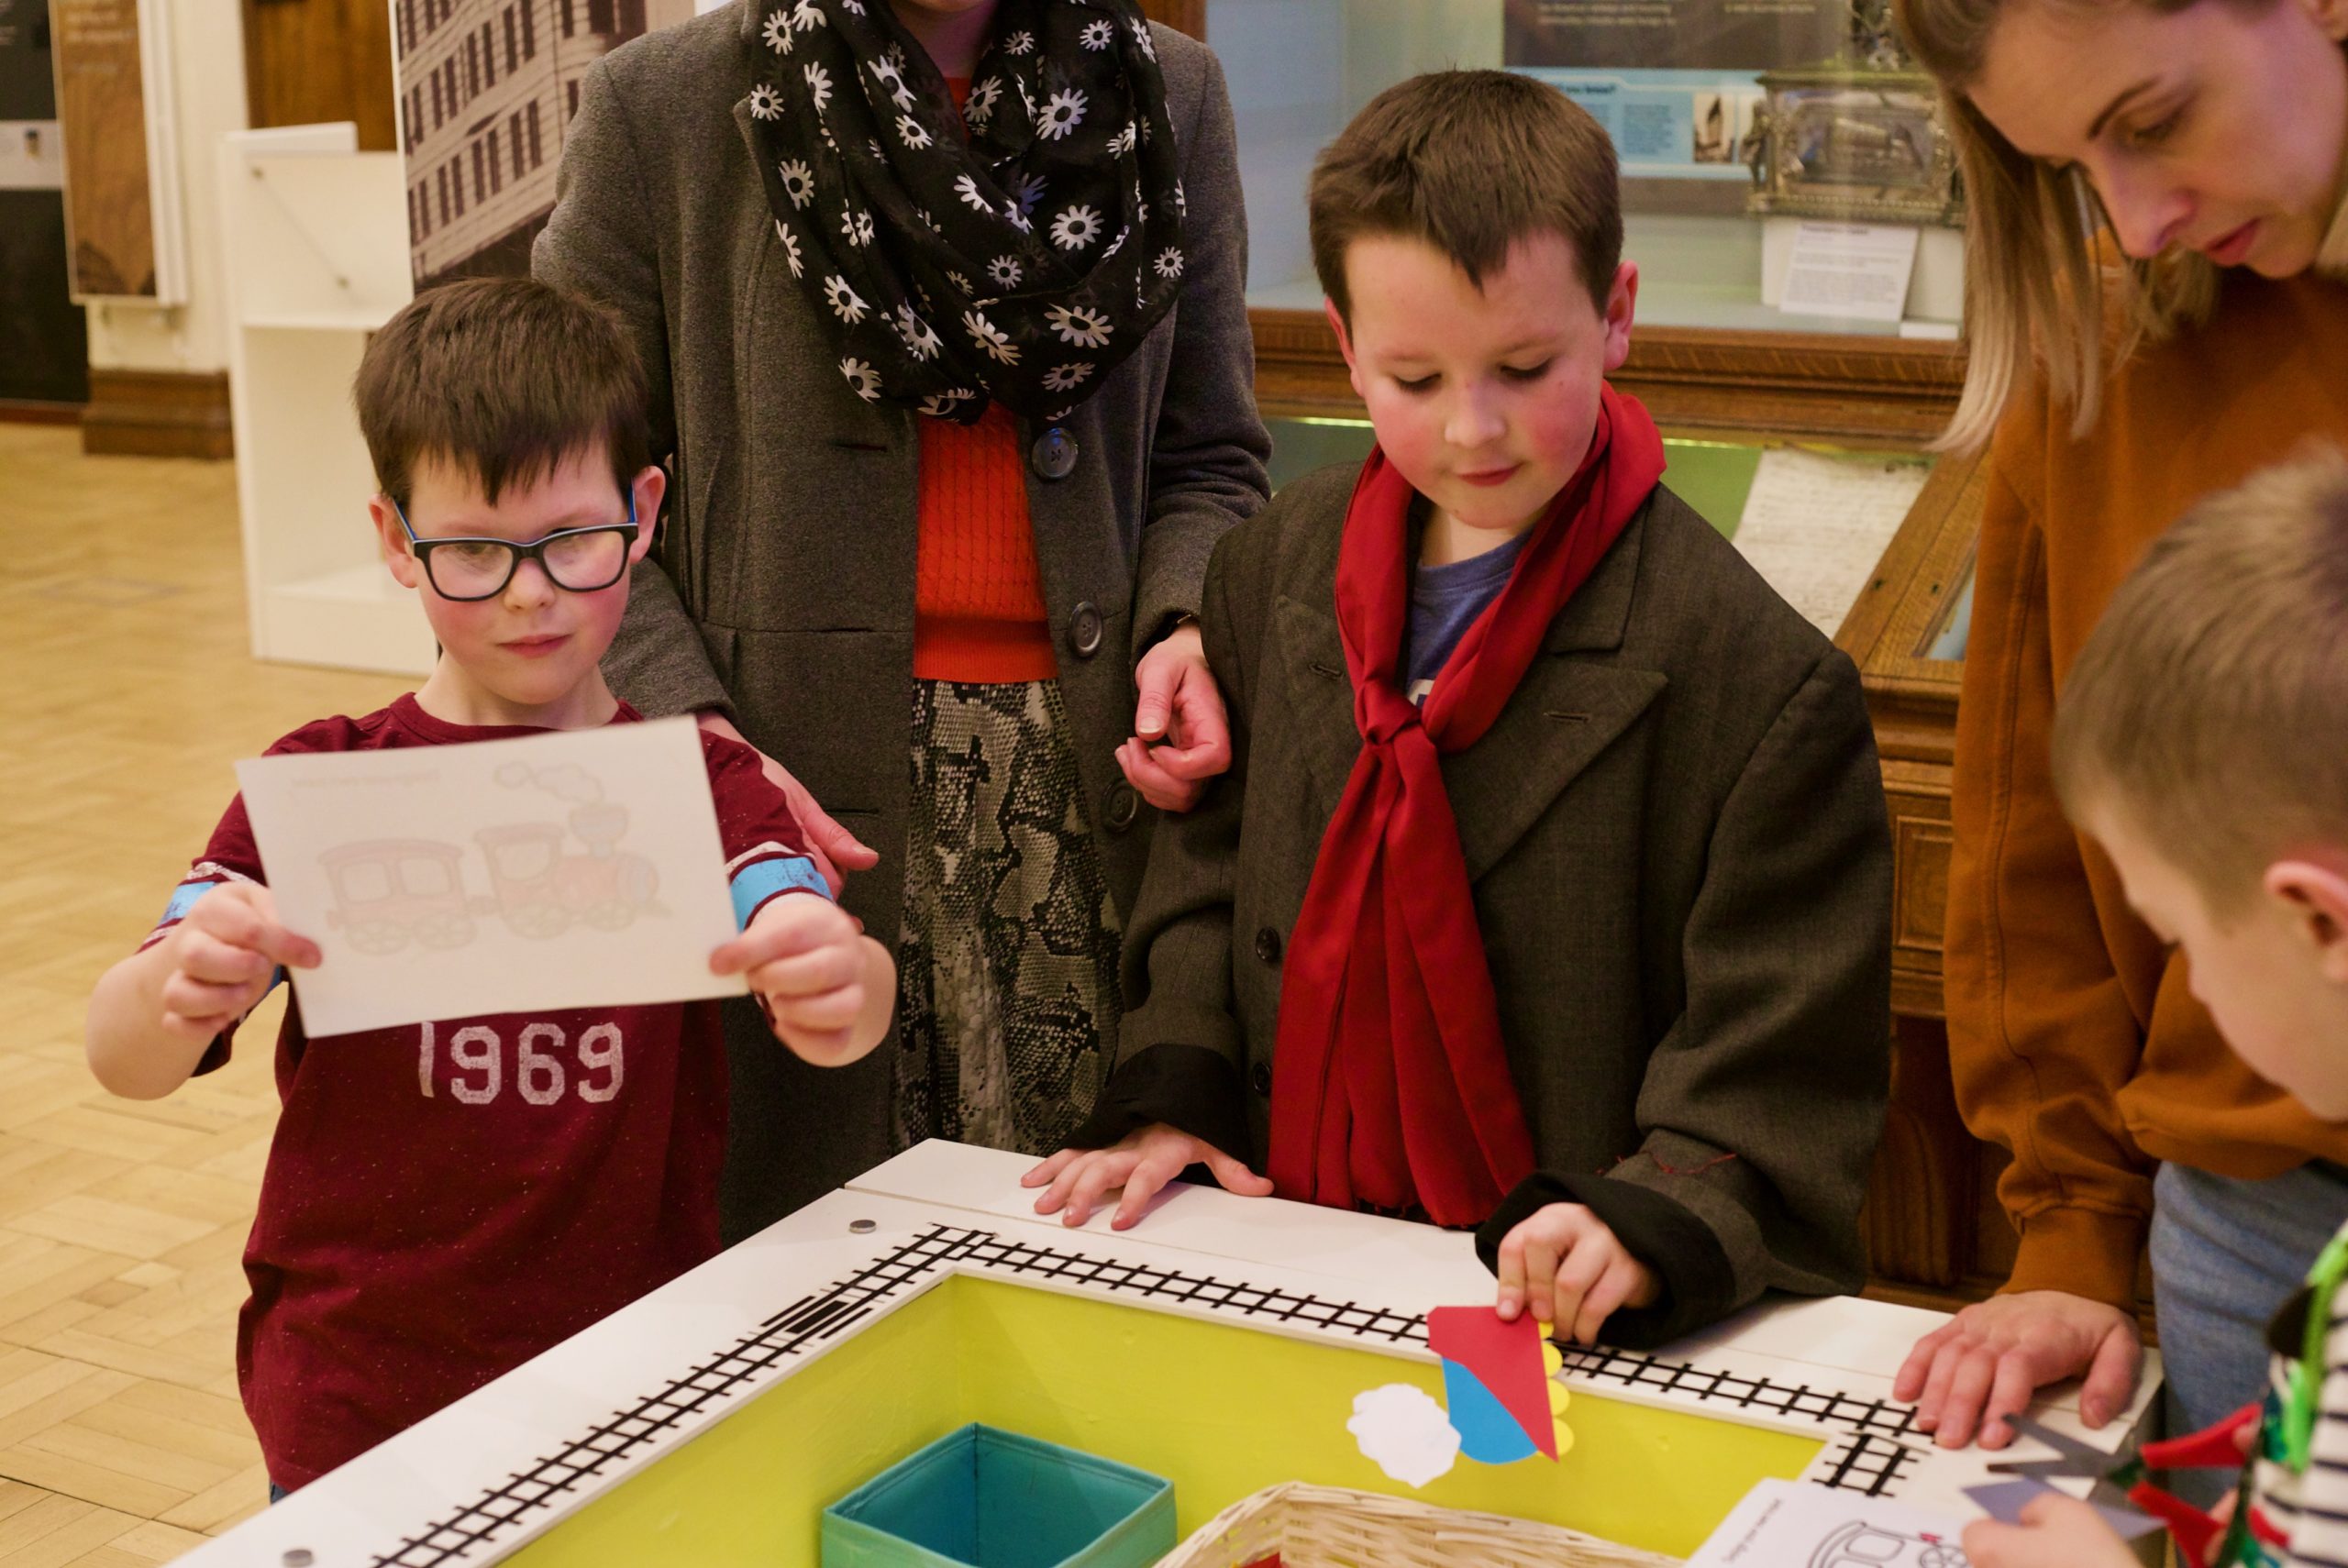 Three young boys colour in pictures of trains at a yellow craft station at the Andrew Carnegie Birthplace Museum with their mothers stood behind them.